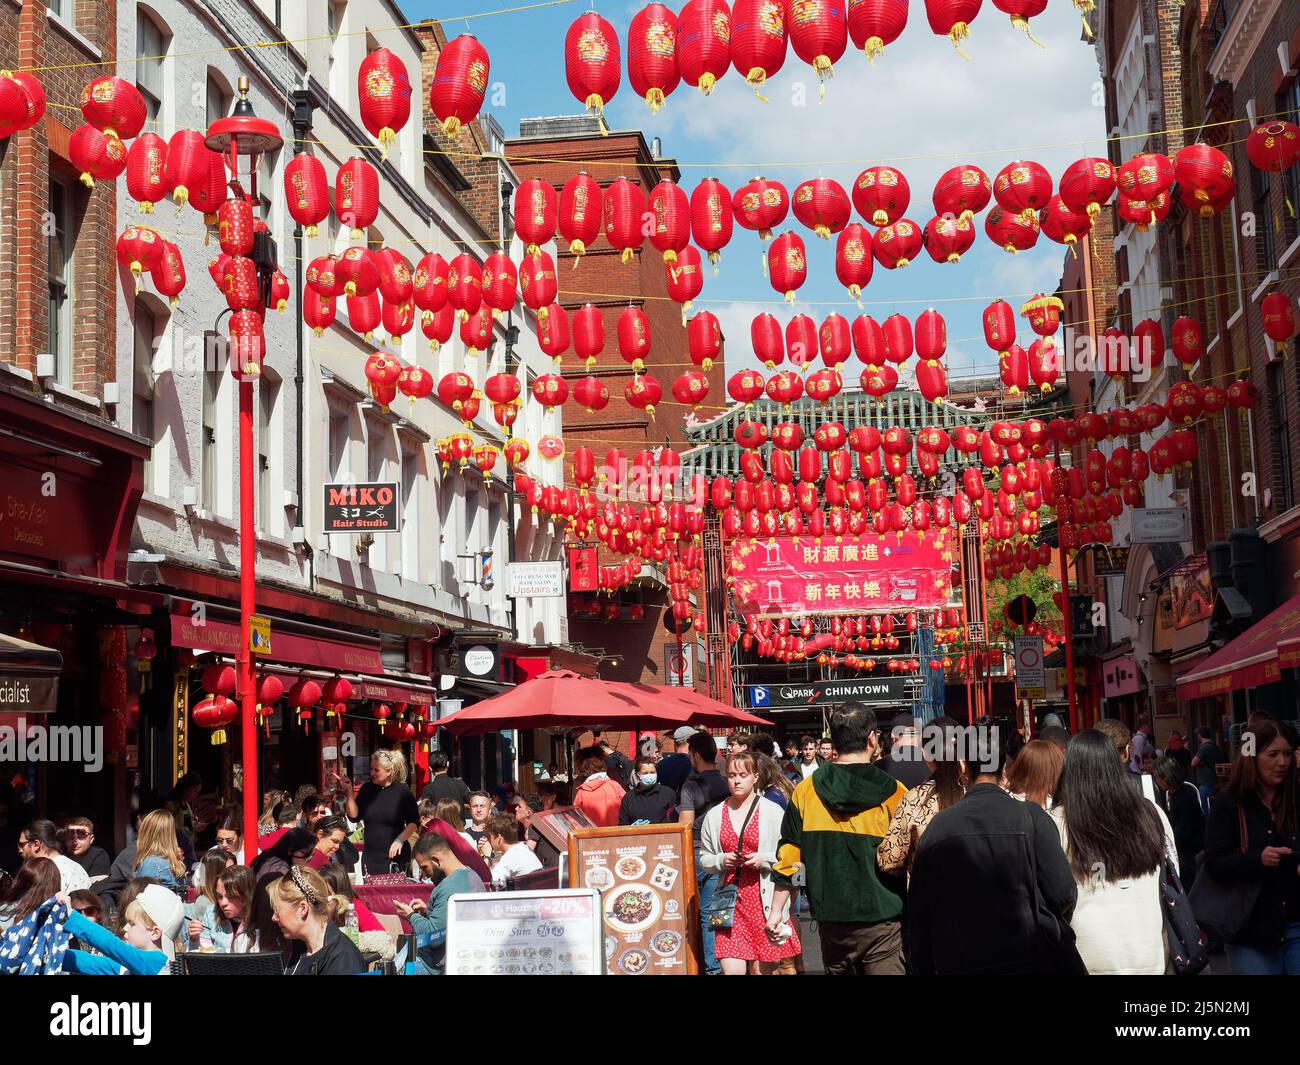 A view along Gerrard Street in London's Chinatown decorated with hanging red lanterns Stock Photo